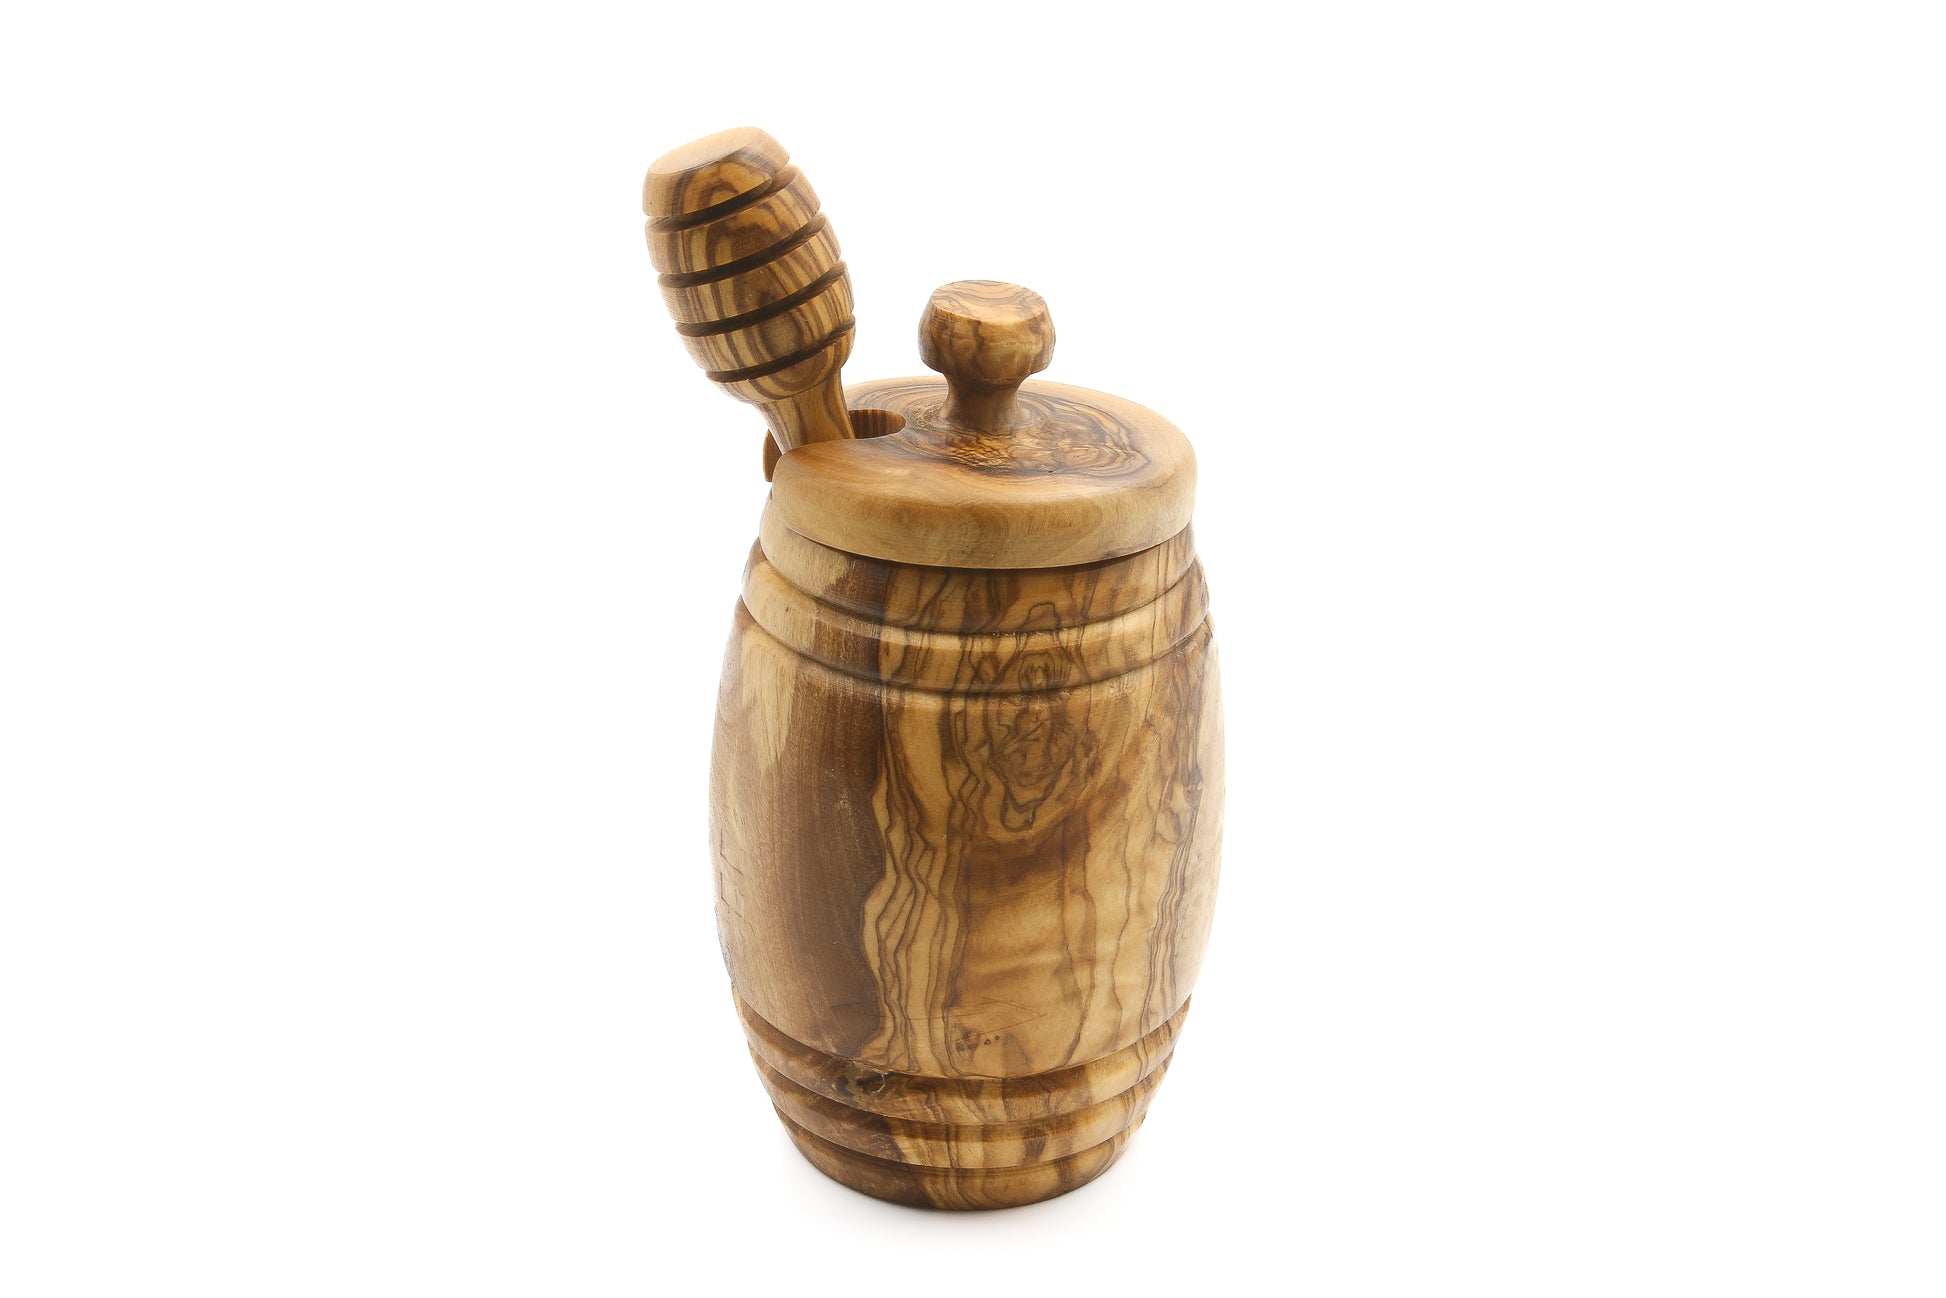 Artisan-made honey container in beautiful olive wood with a lid and honey dipper